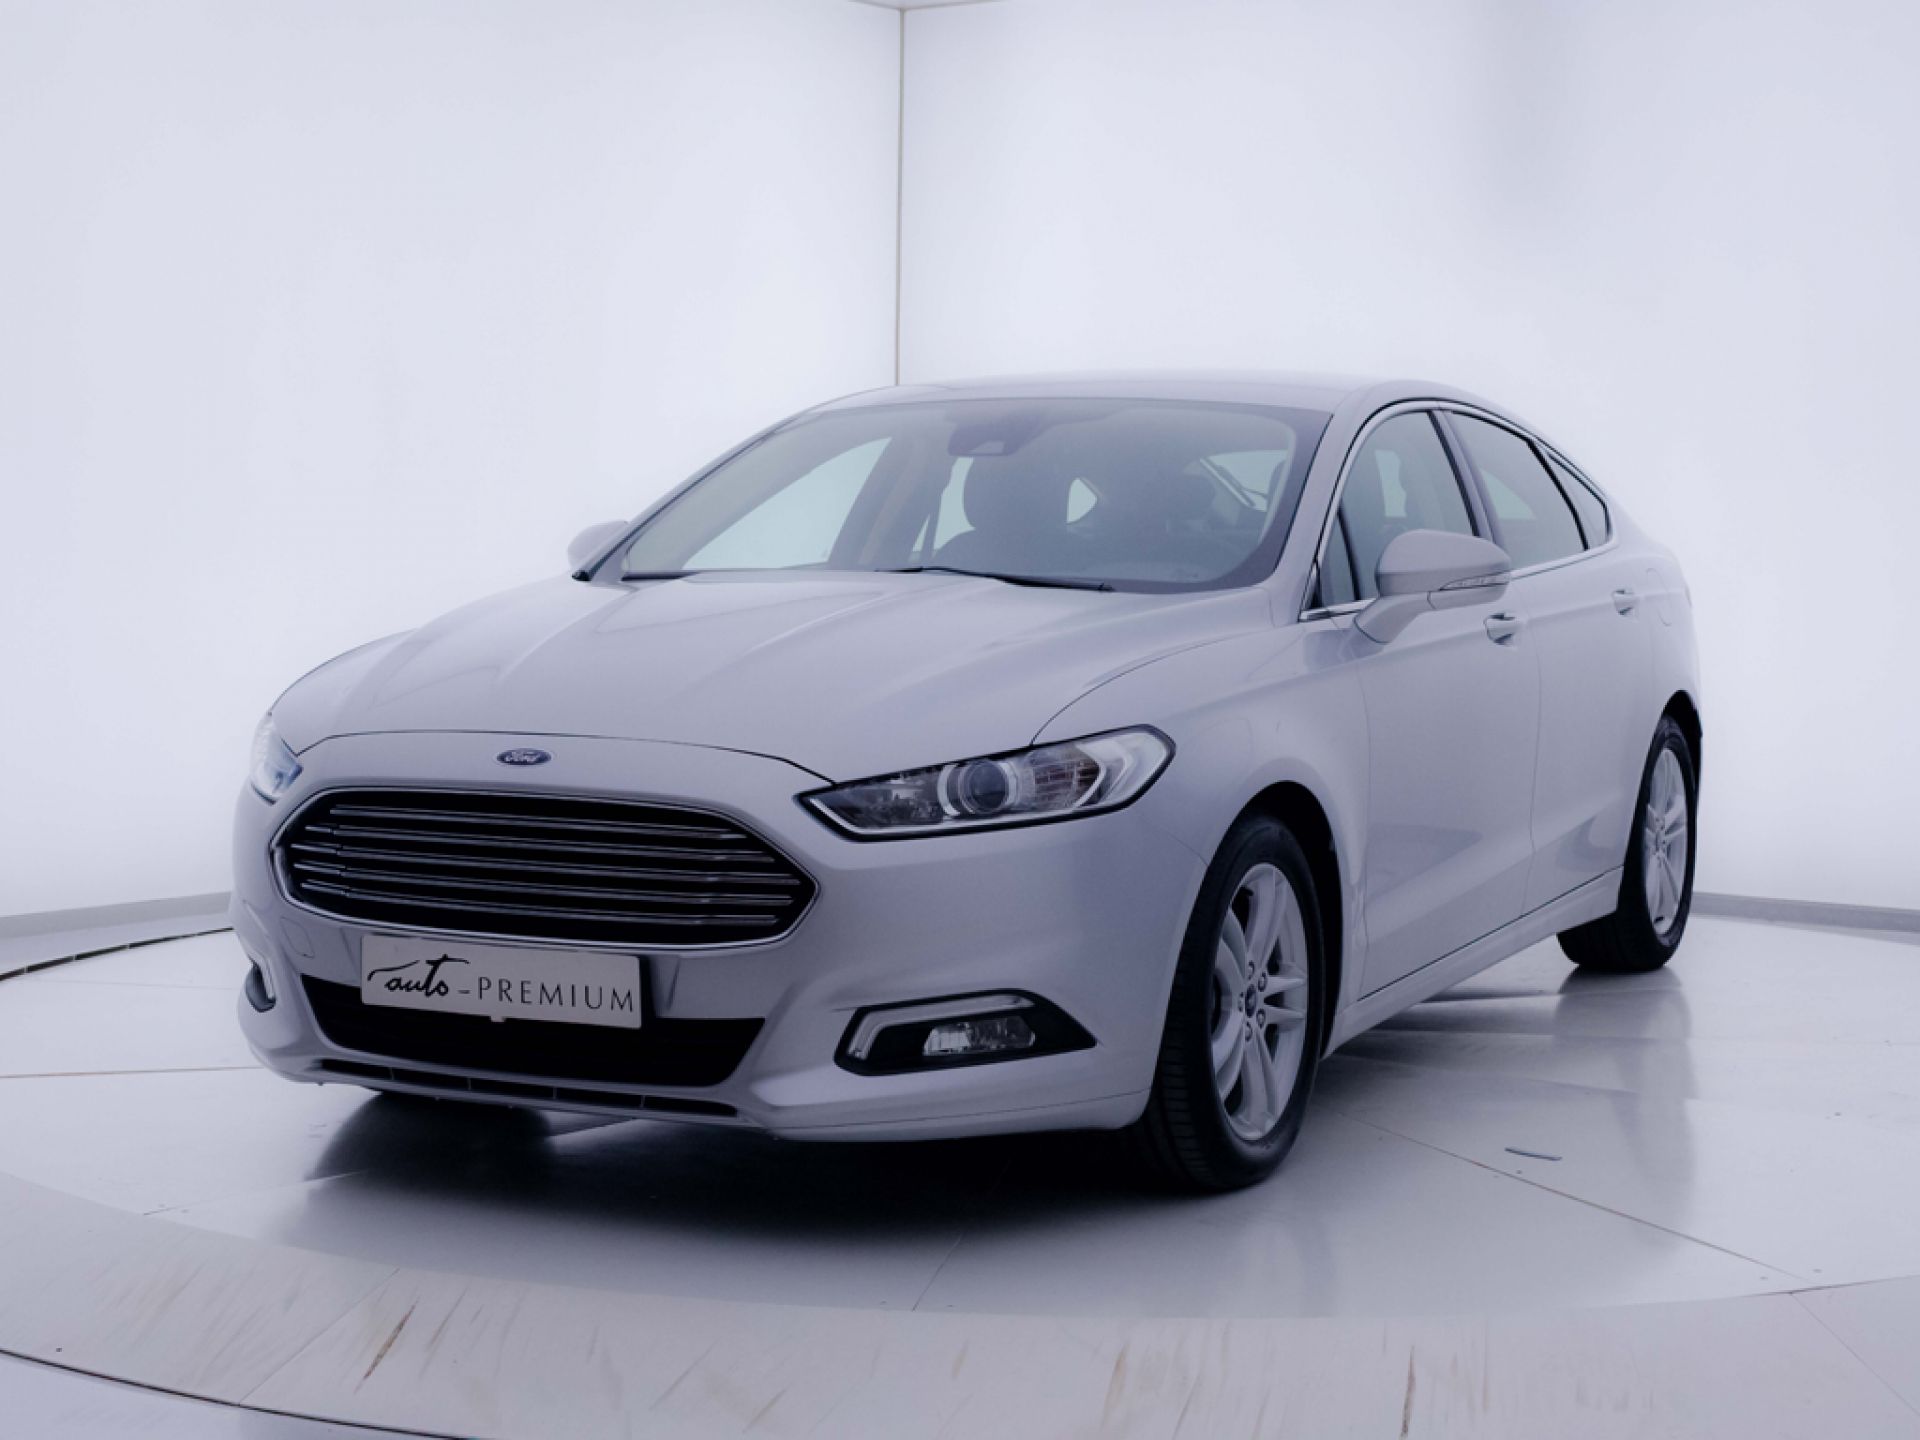 Ford Mondeo 1.5 TDCi 88kW (120CV) Trend